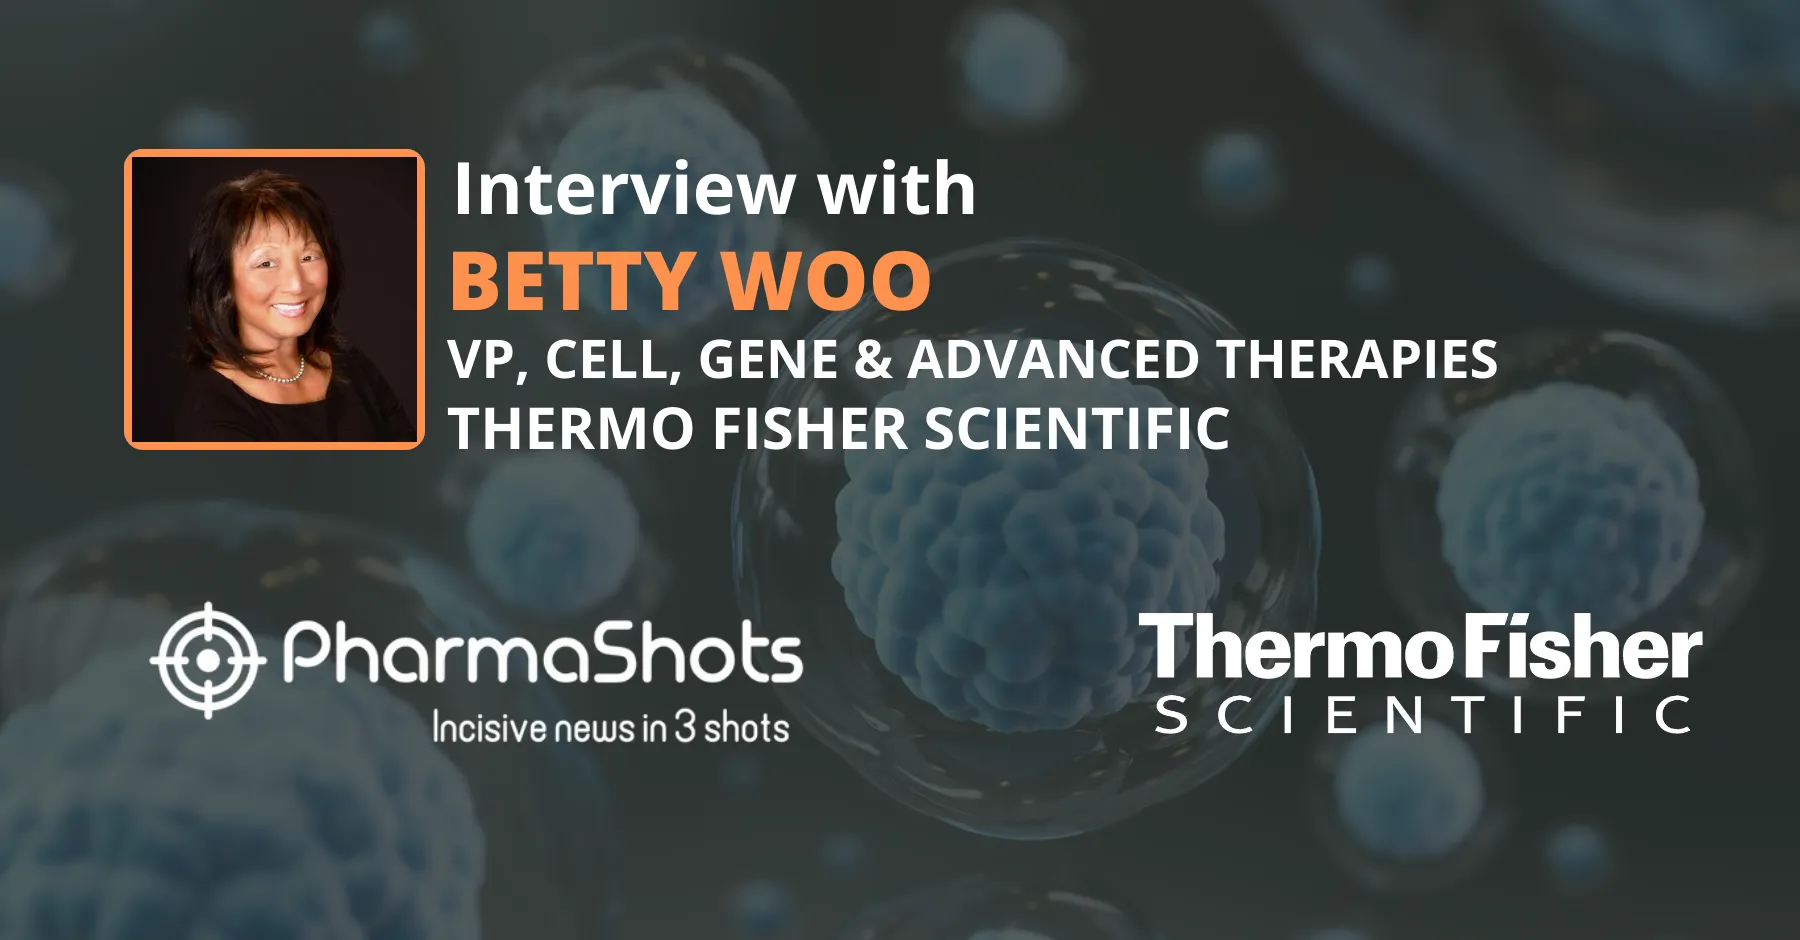 In an Insightful Conversation with PharmaShots, Betty Woo Shares the Highlights Cell Therapy Collaboration Program